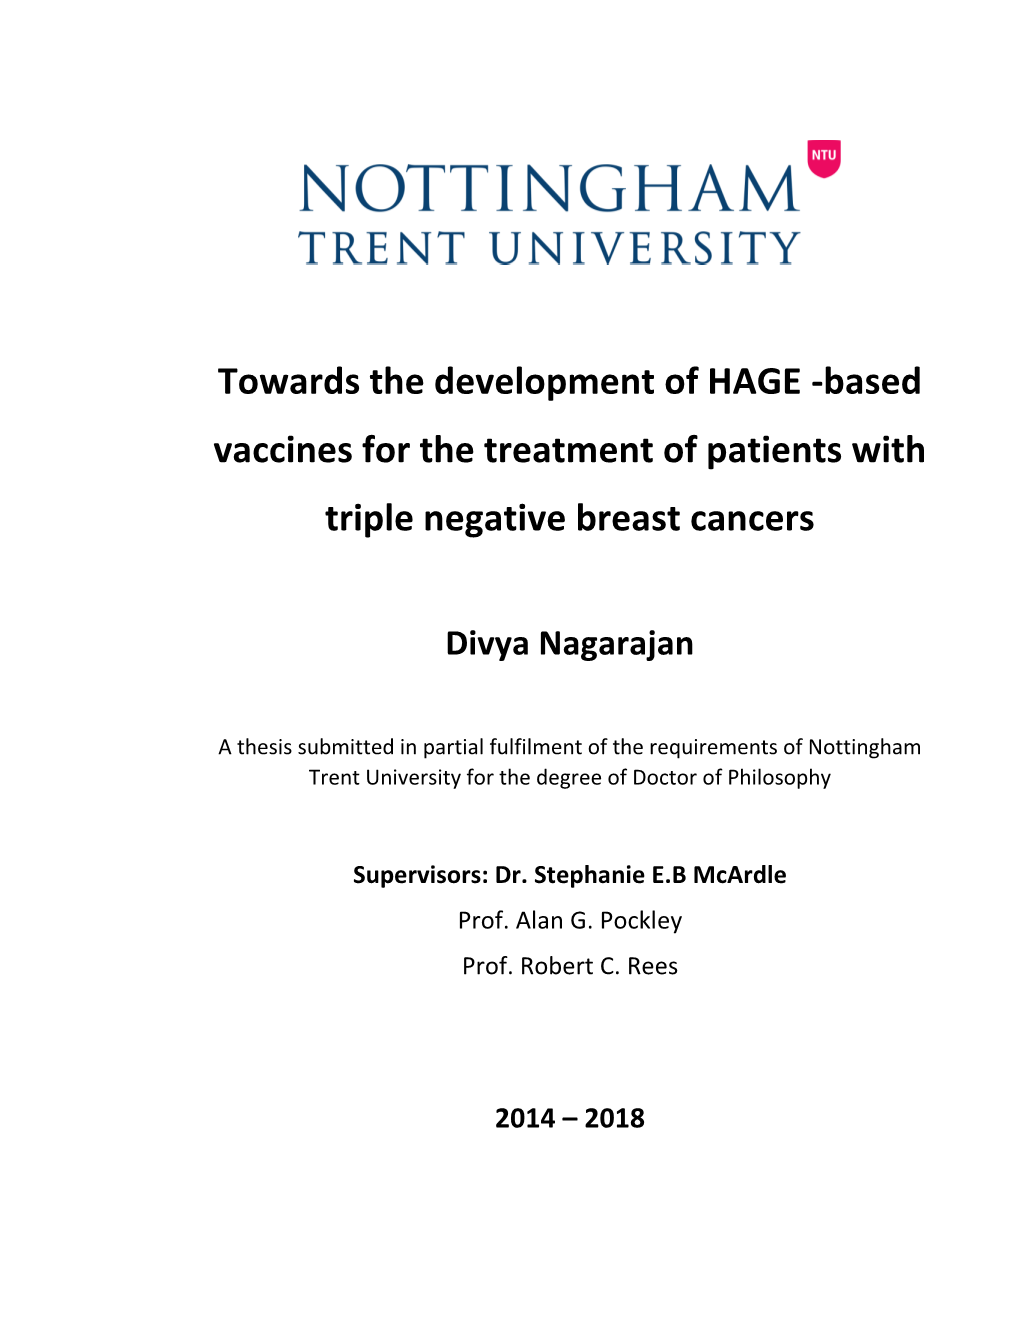 Towards the Development of HAGE -Based Vaccines for the Treatment of Patients with Triple Negative Breast Cancers